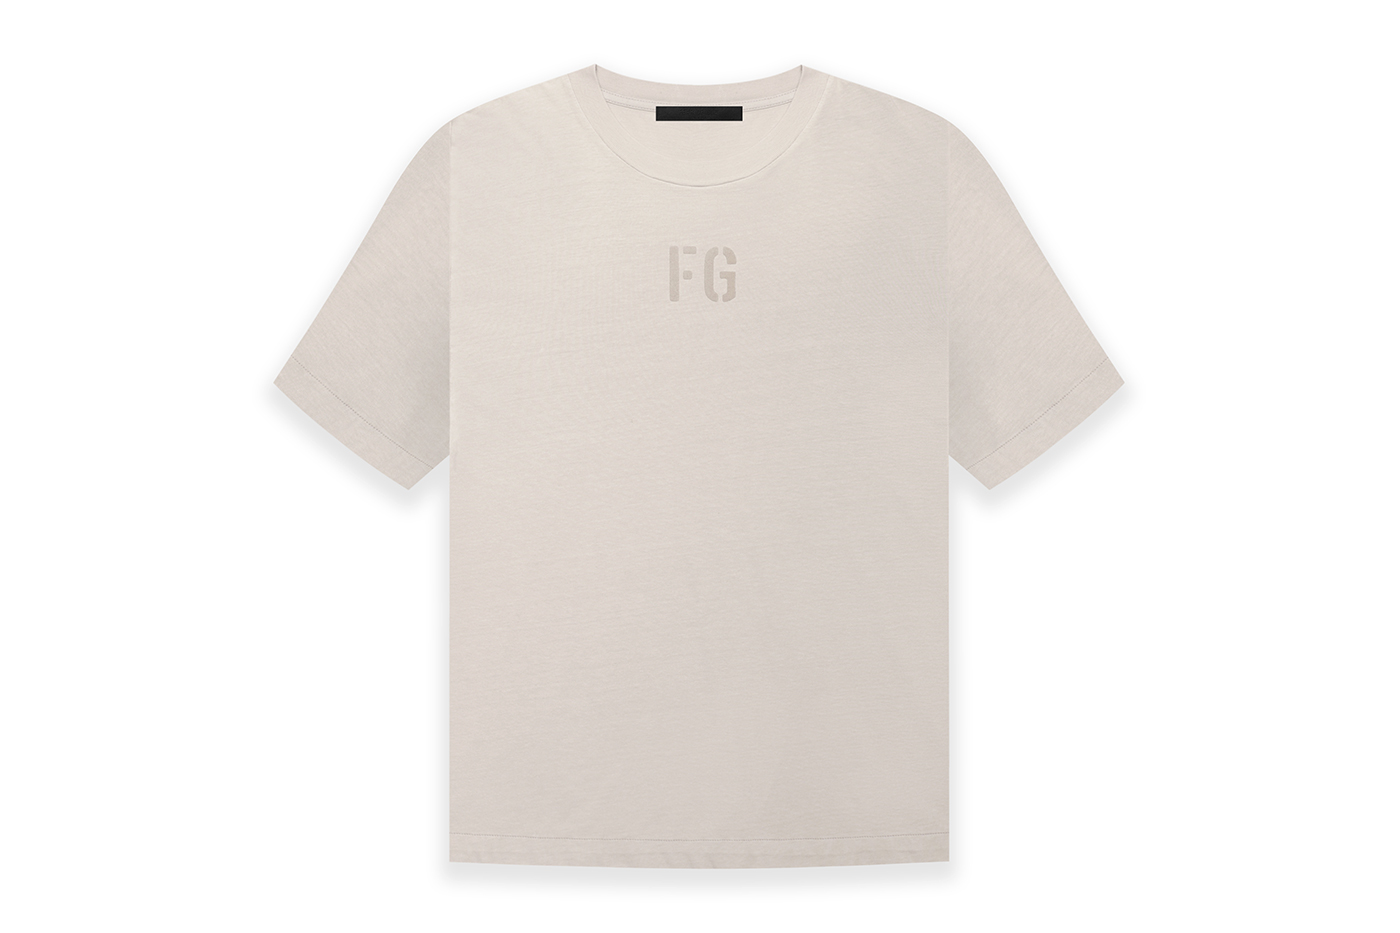 FEAR OF GOD 7th collection 7Tee-